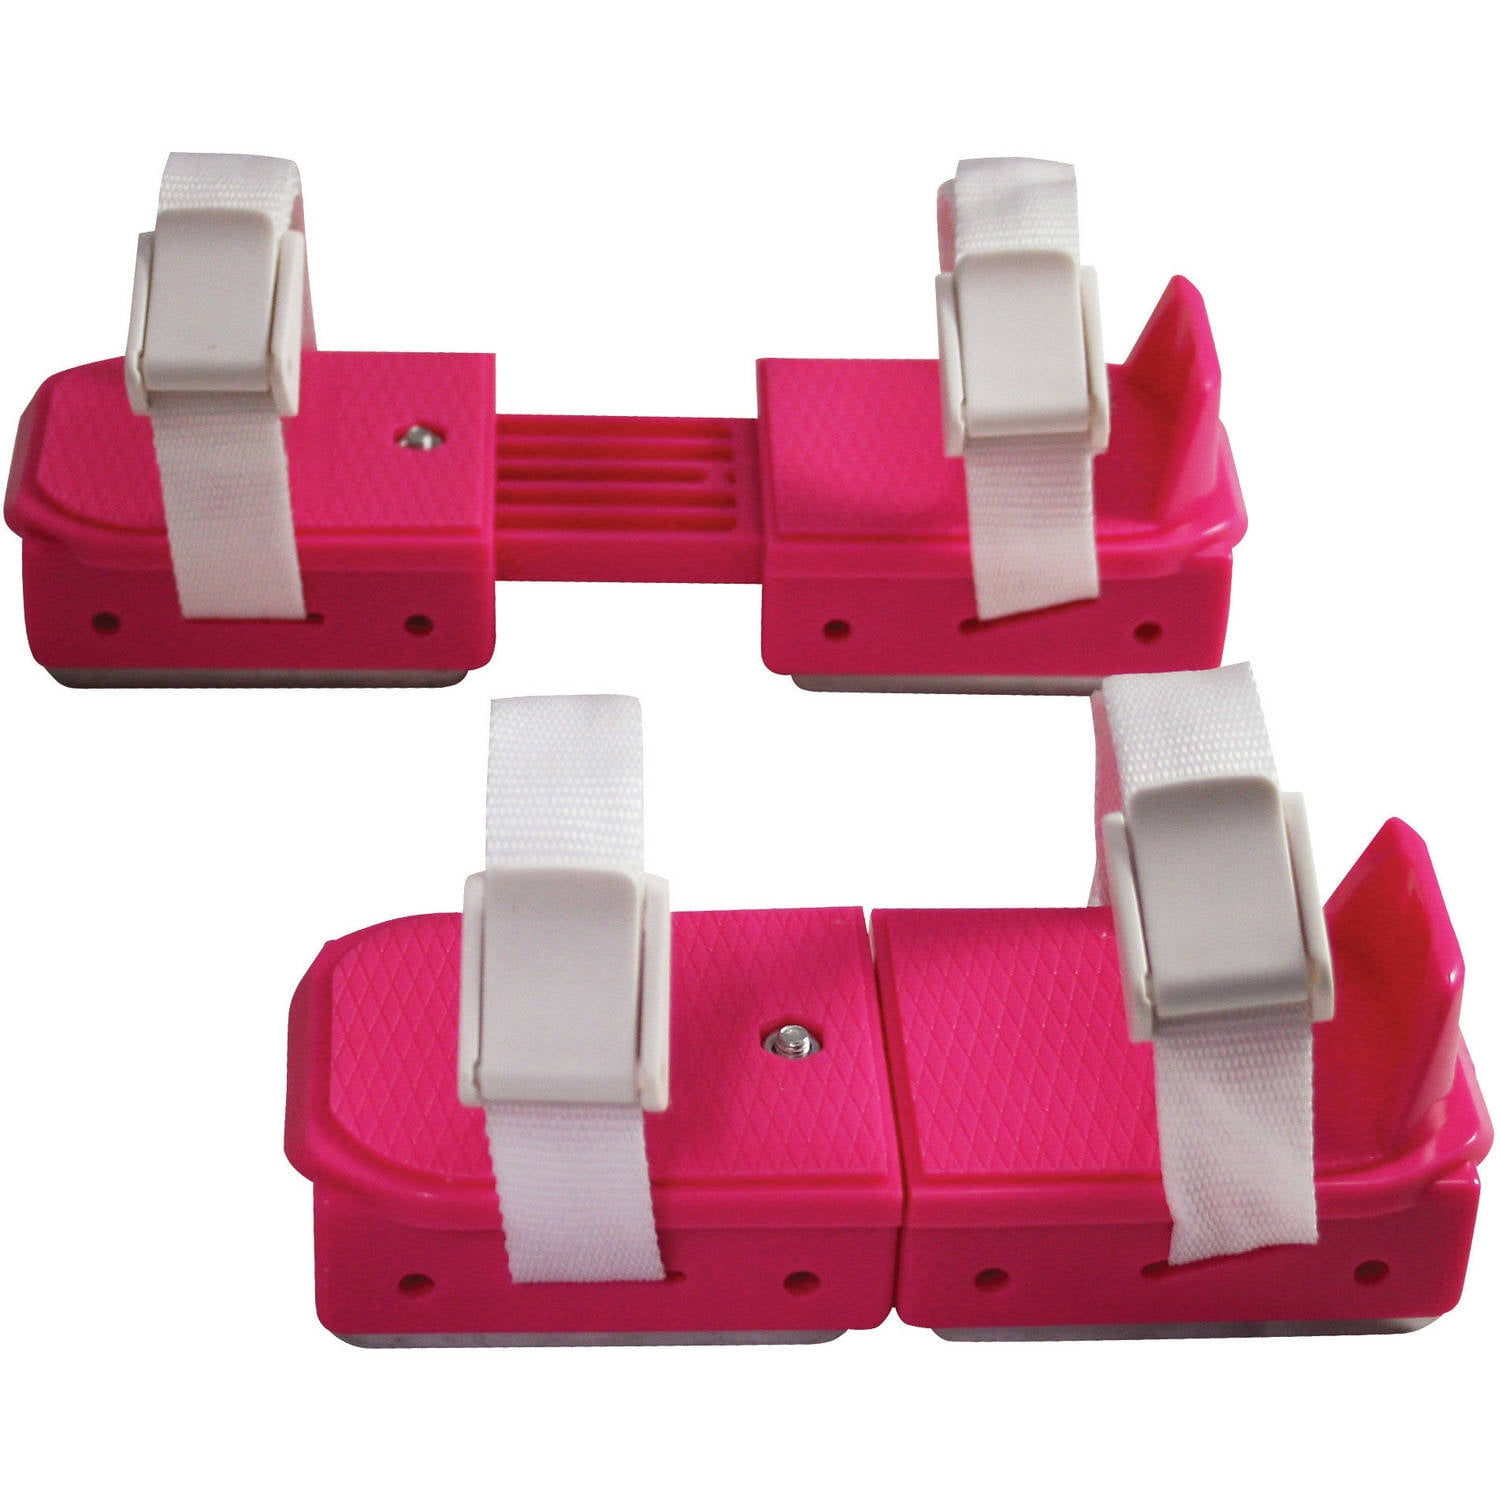 Ice Skates Double Blade Runners Adjustable Age 2-6 